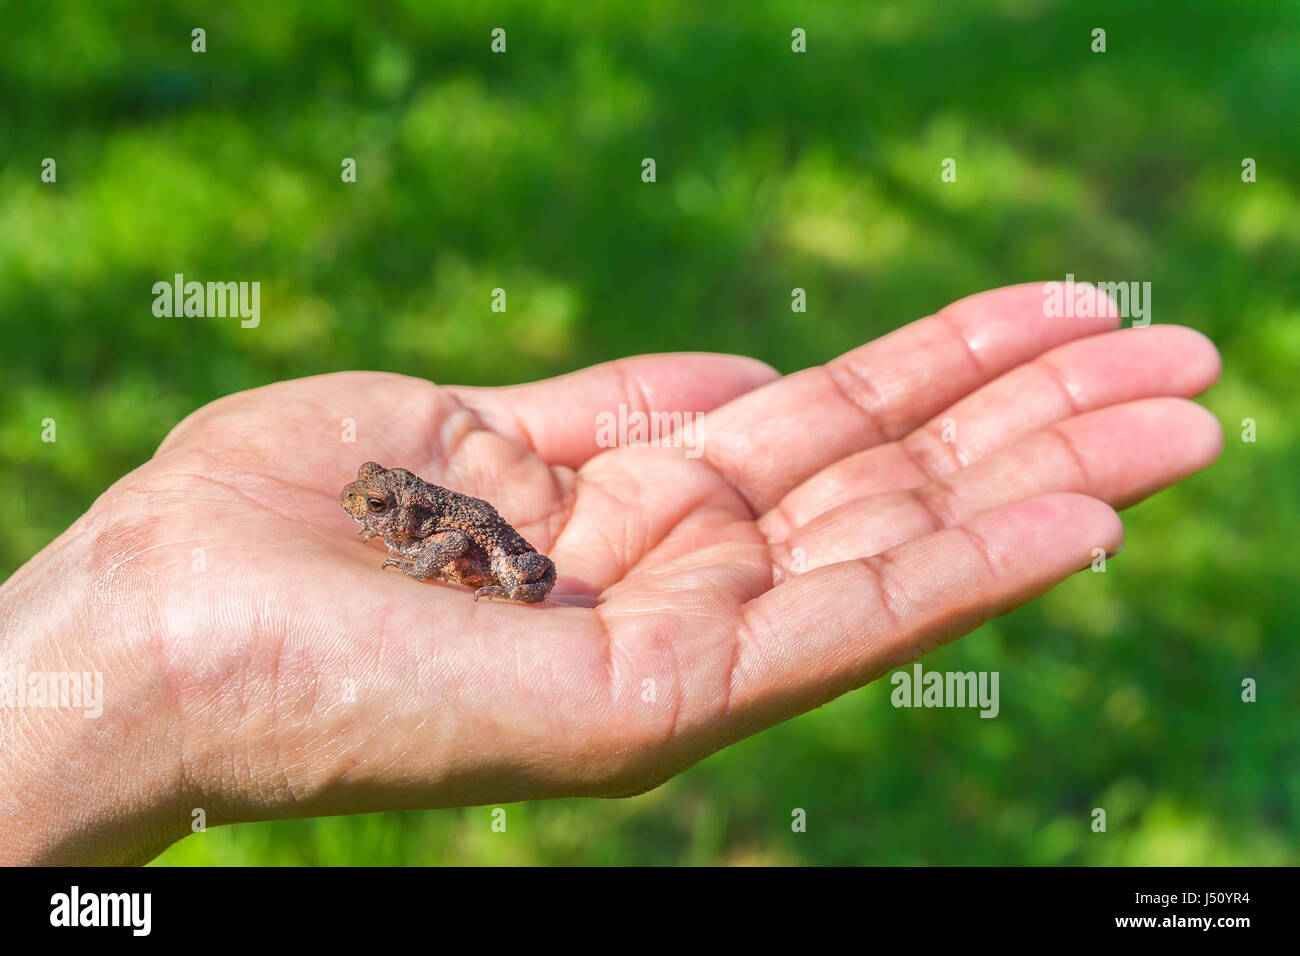 Little brown frog sitting on female hand with green grass Stock Photo